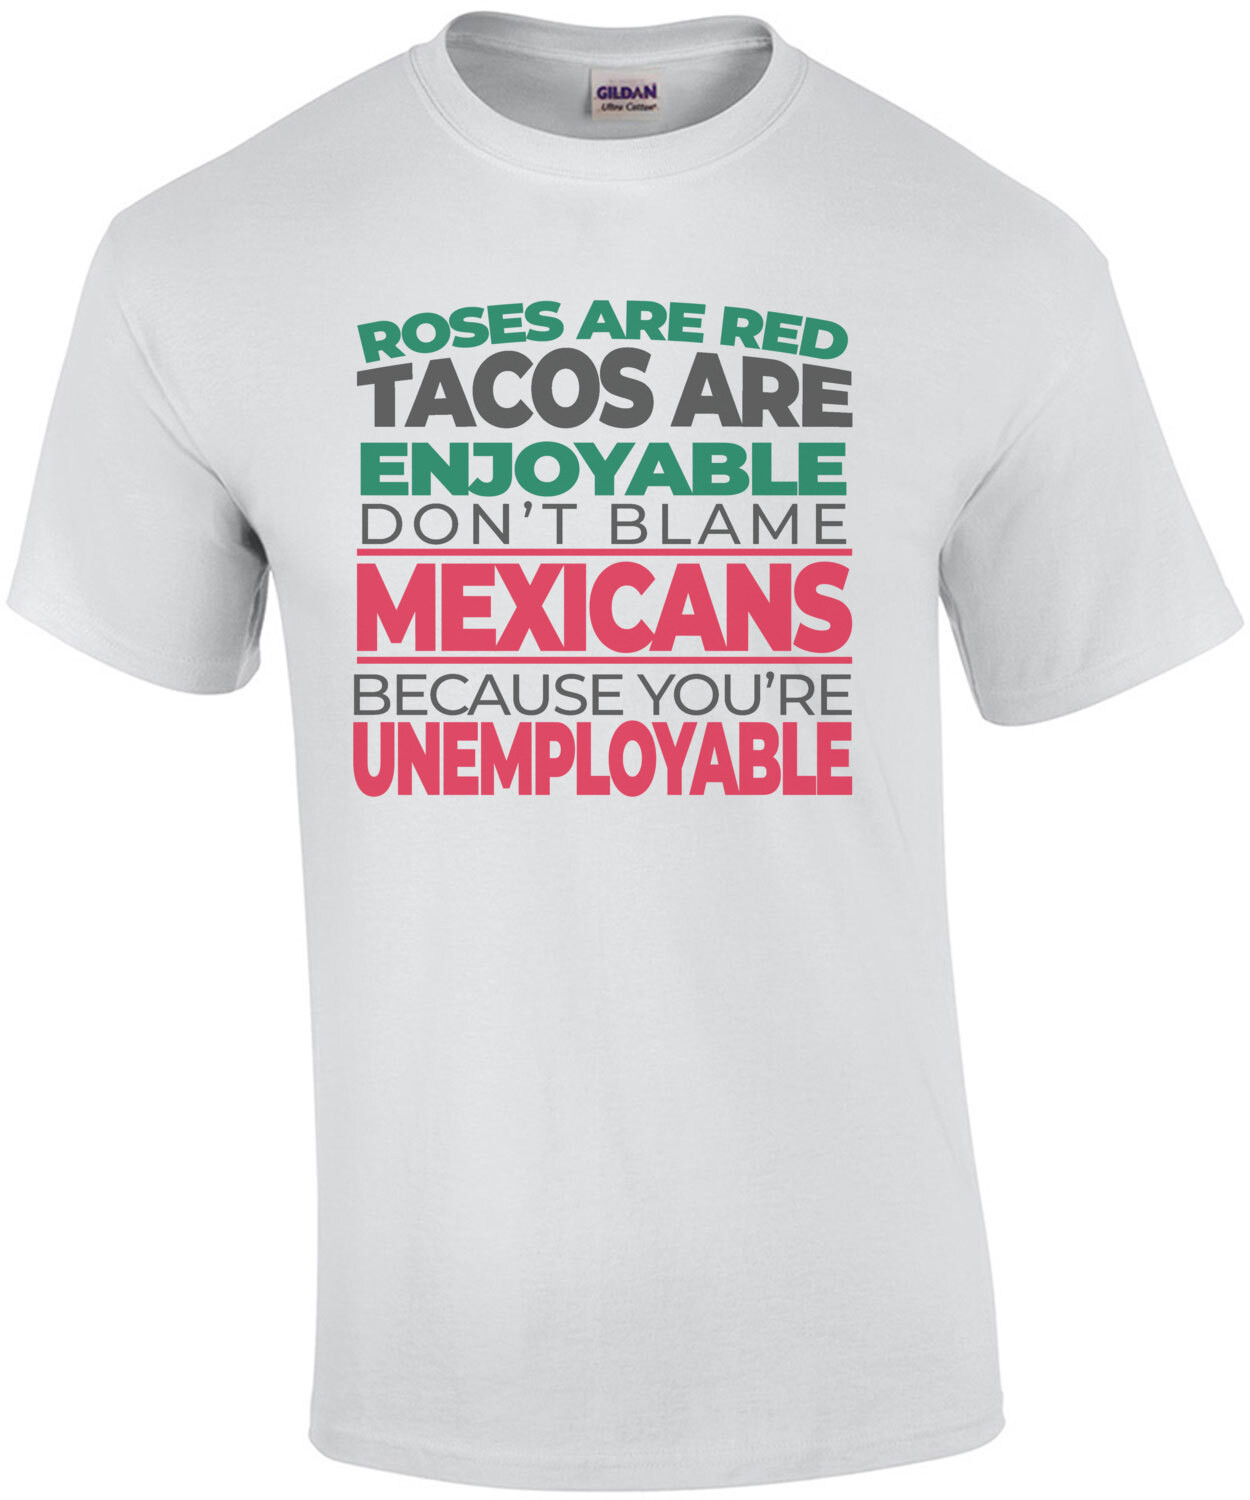 Roses are red tacos are enjoyable don't blame Mexicans because you're unemployable - funny political t-shirt